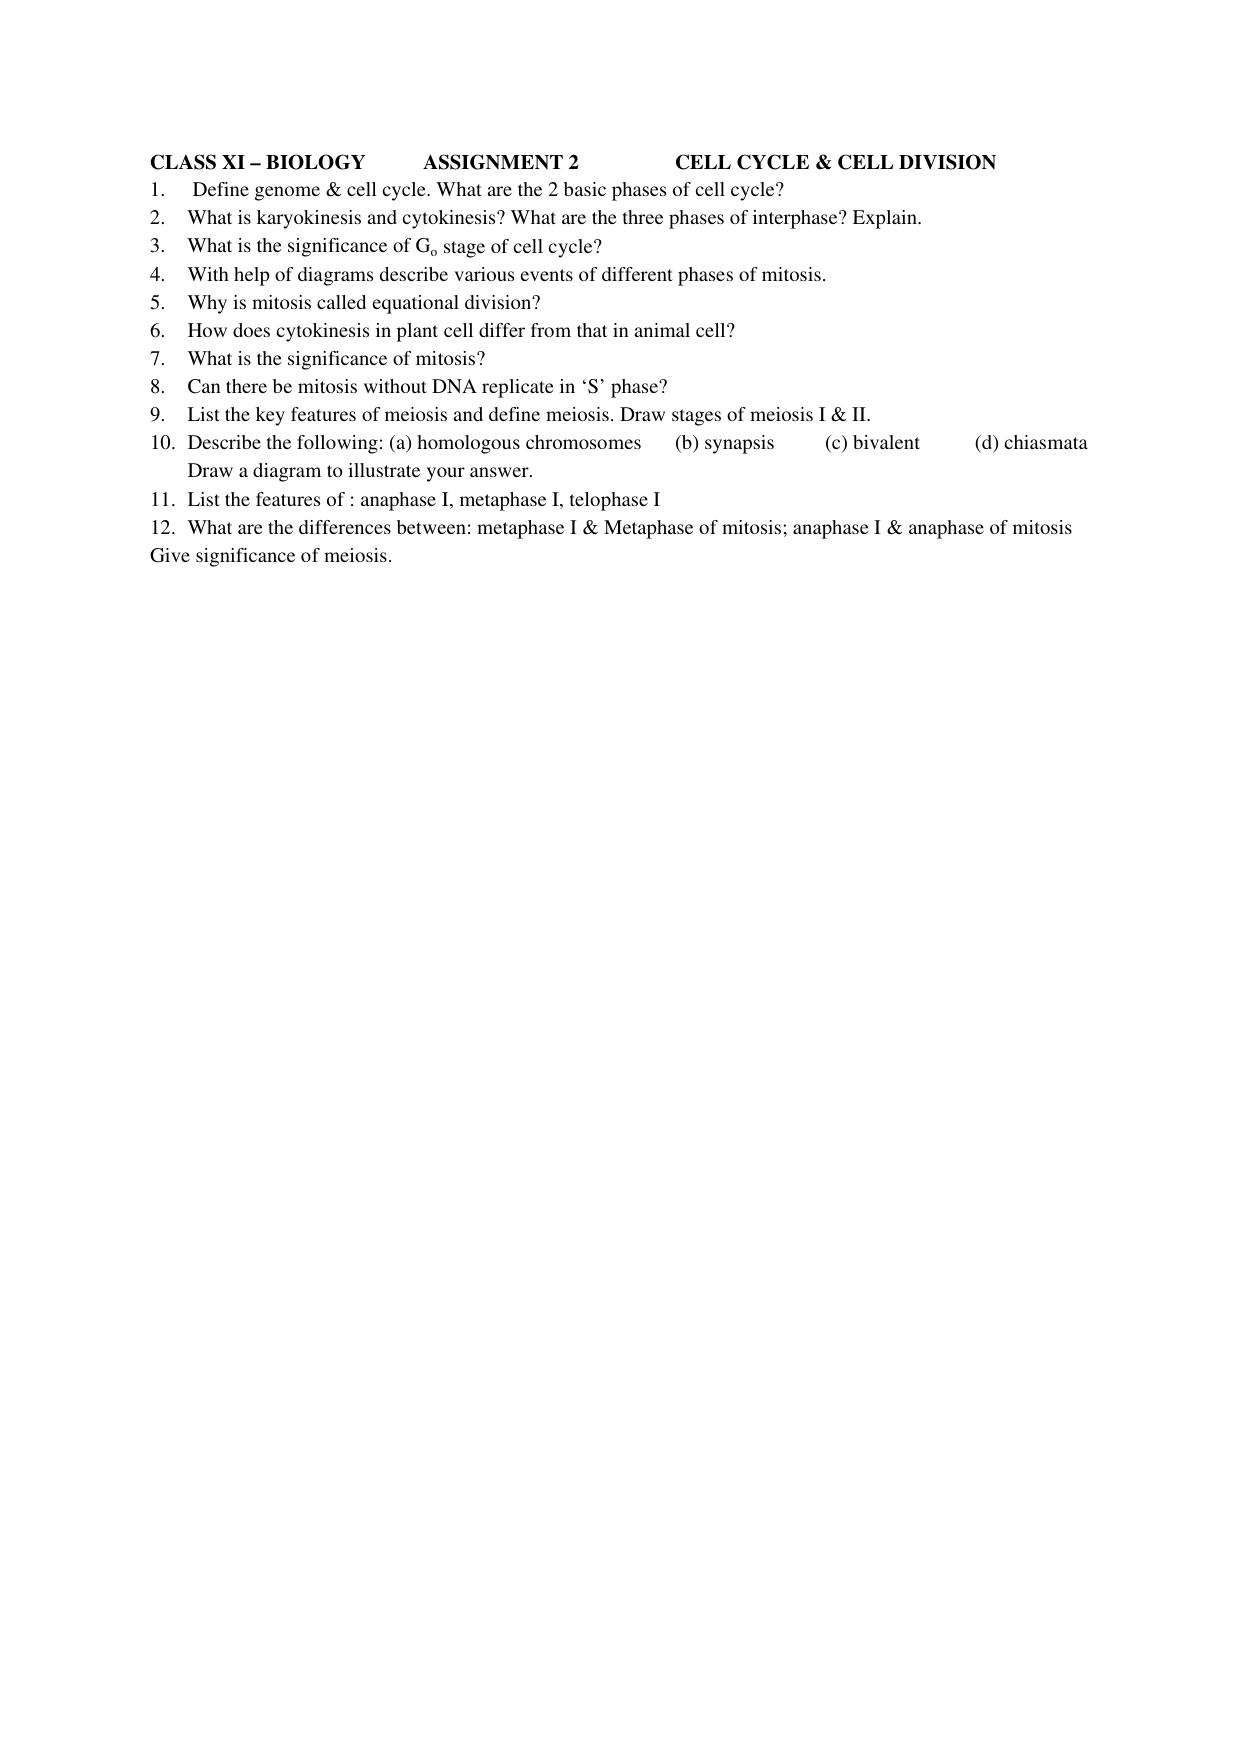 CBSE Worksheets for Class 11 Biology Assignment 2 - Page 1